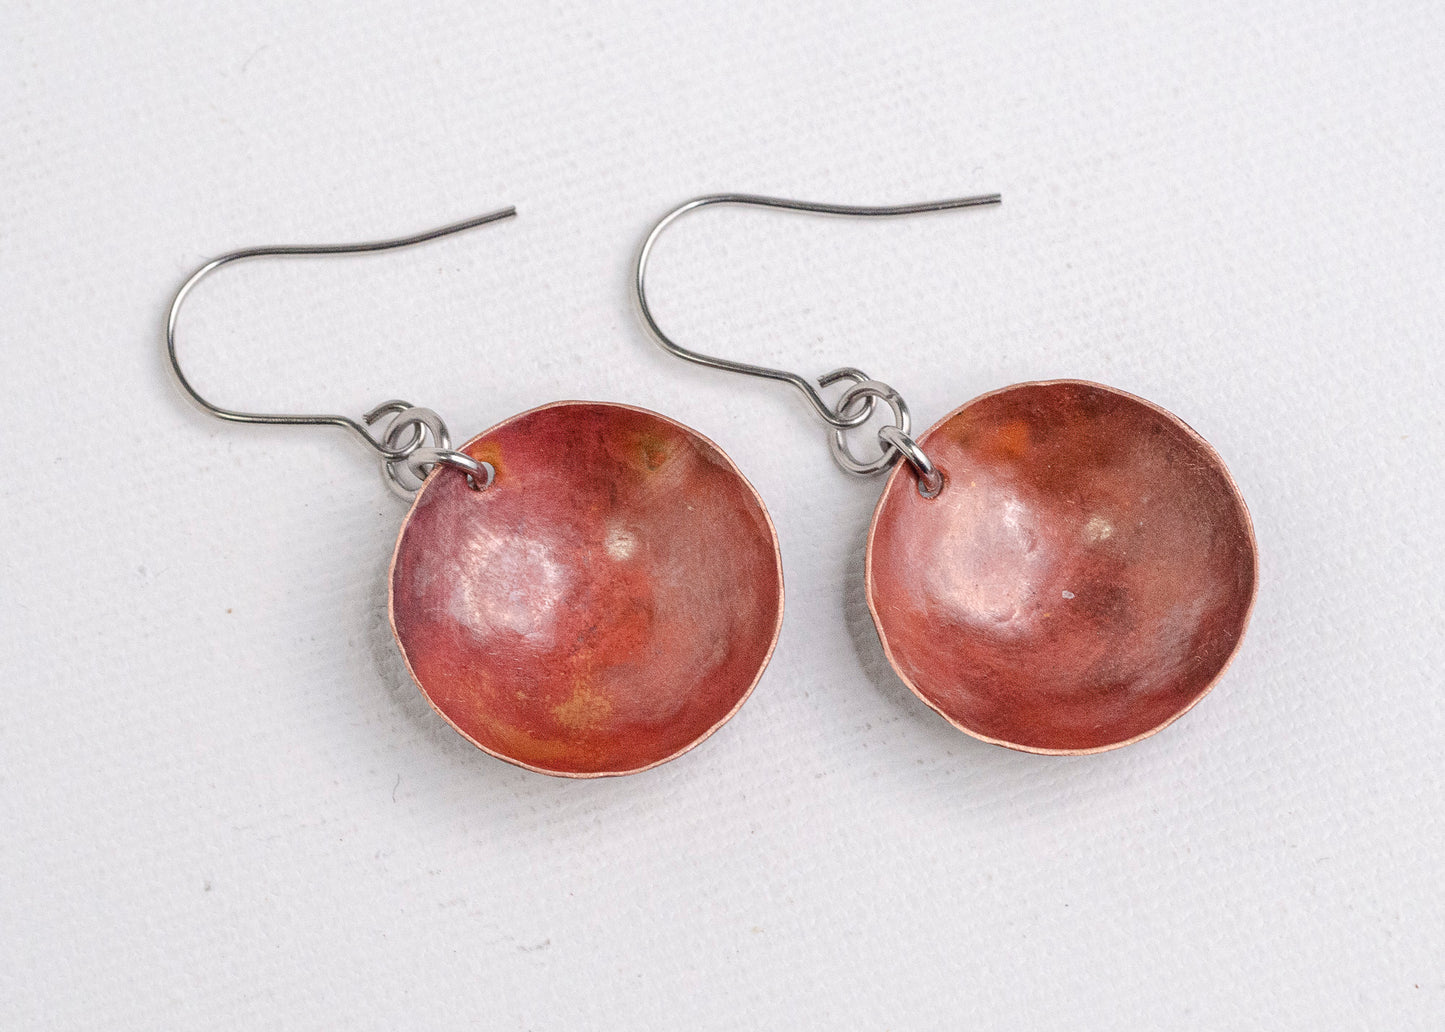 Parabola Earrings Patinated Copper